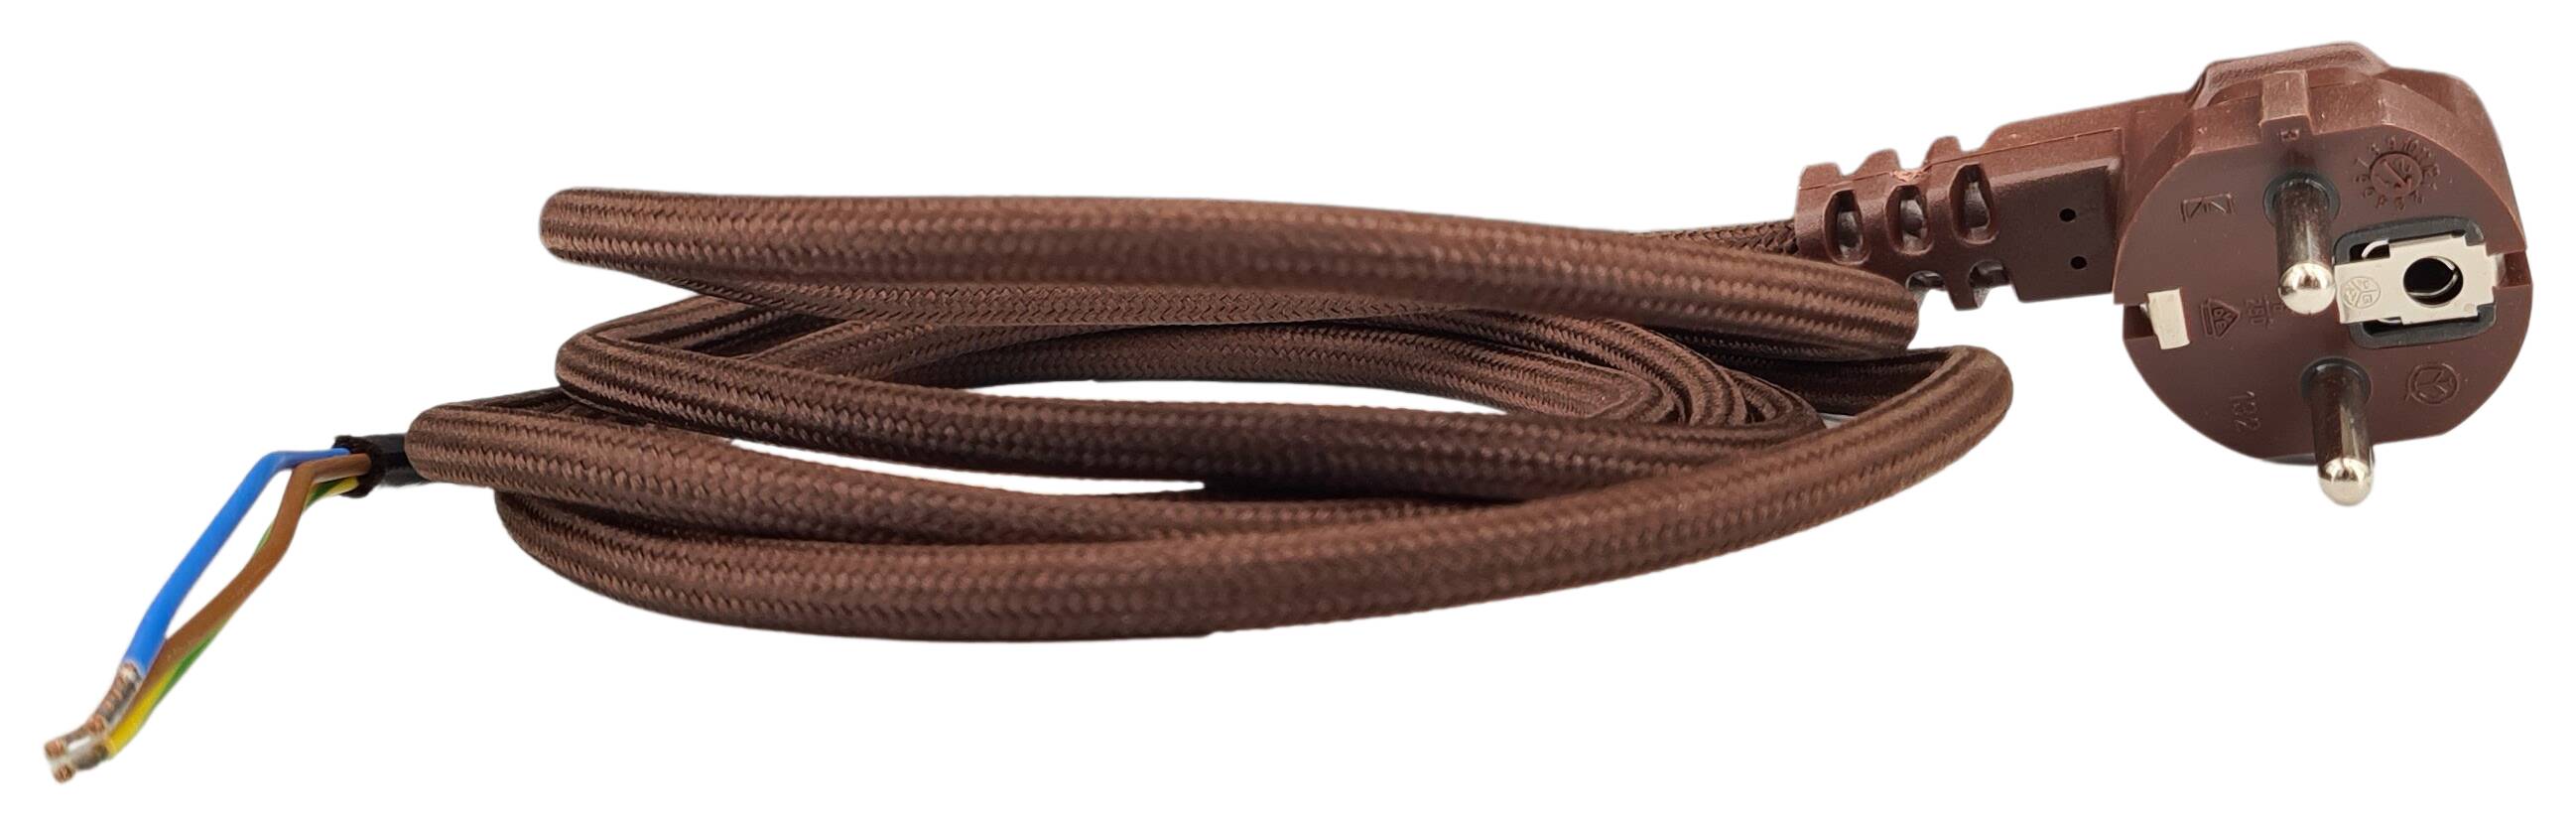 cord-set 3G 0,75/2300 round with schuko angled plug textile coated cable colour 285 brown